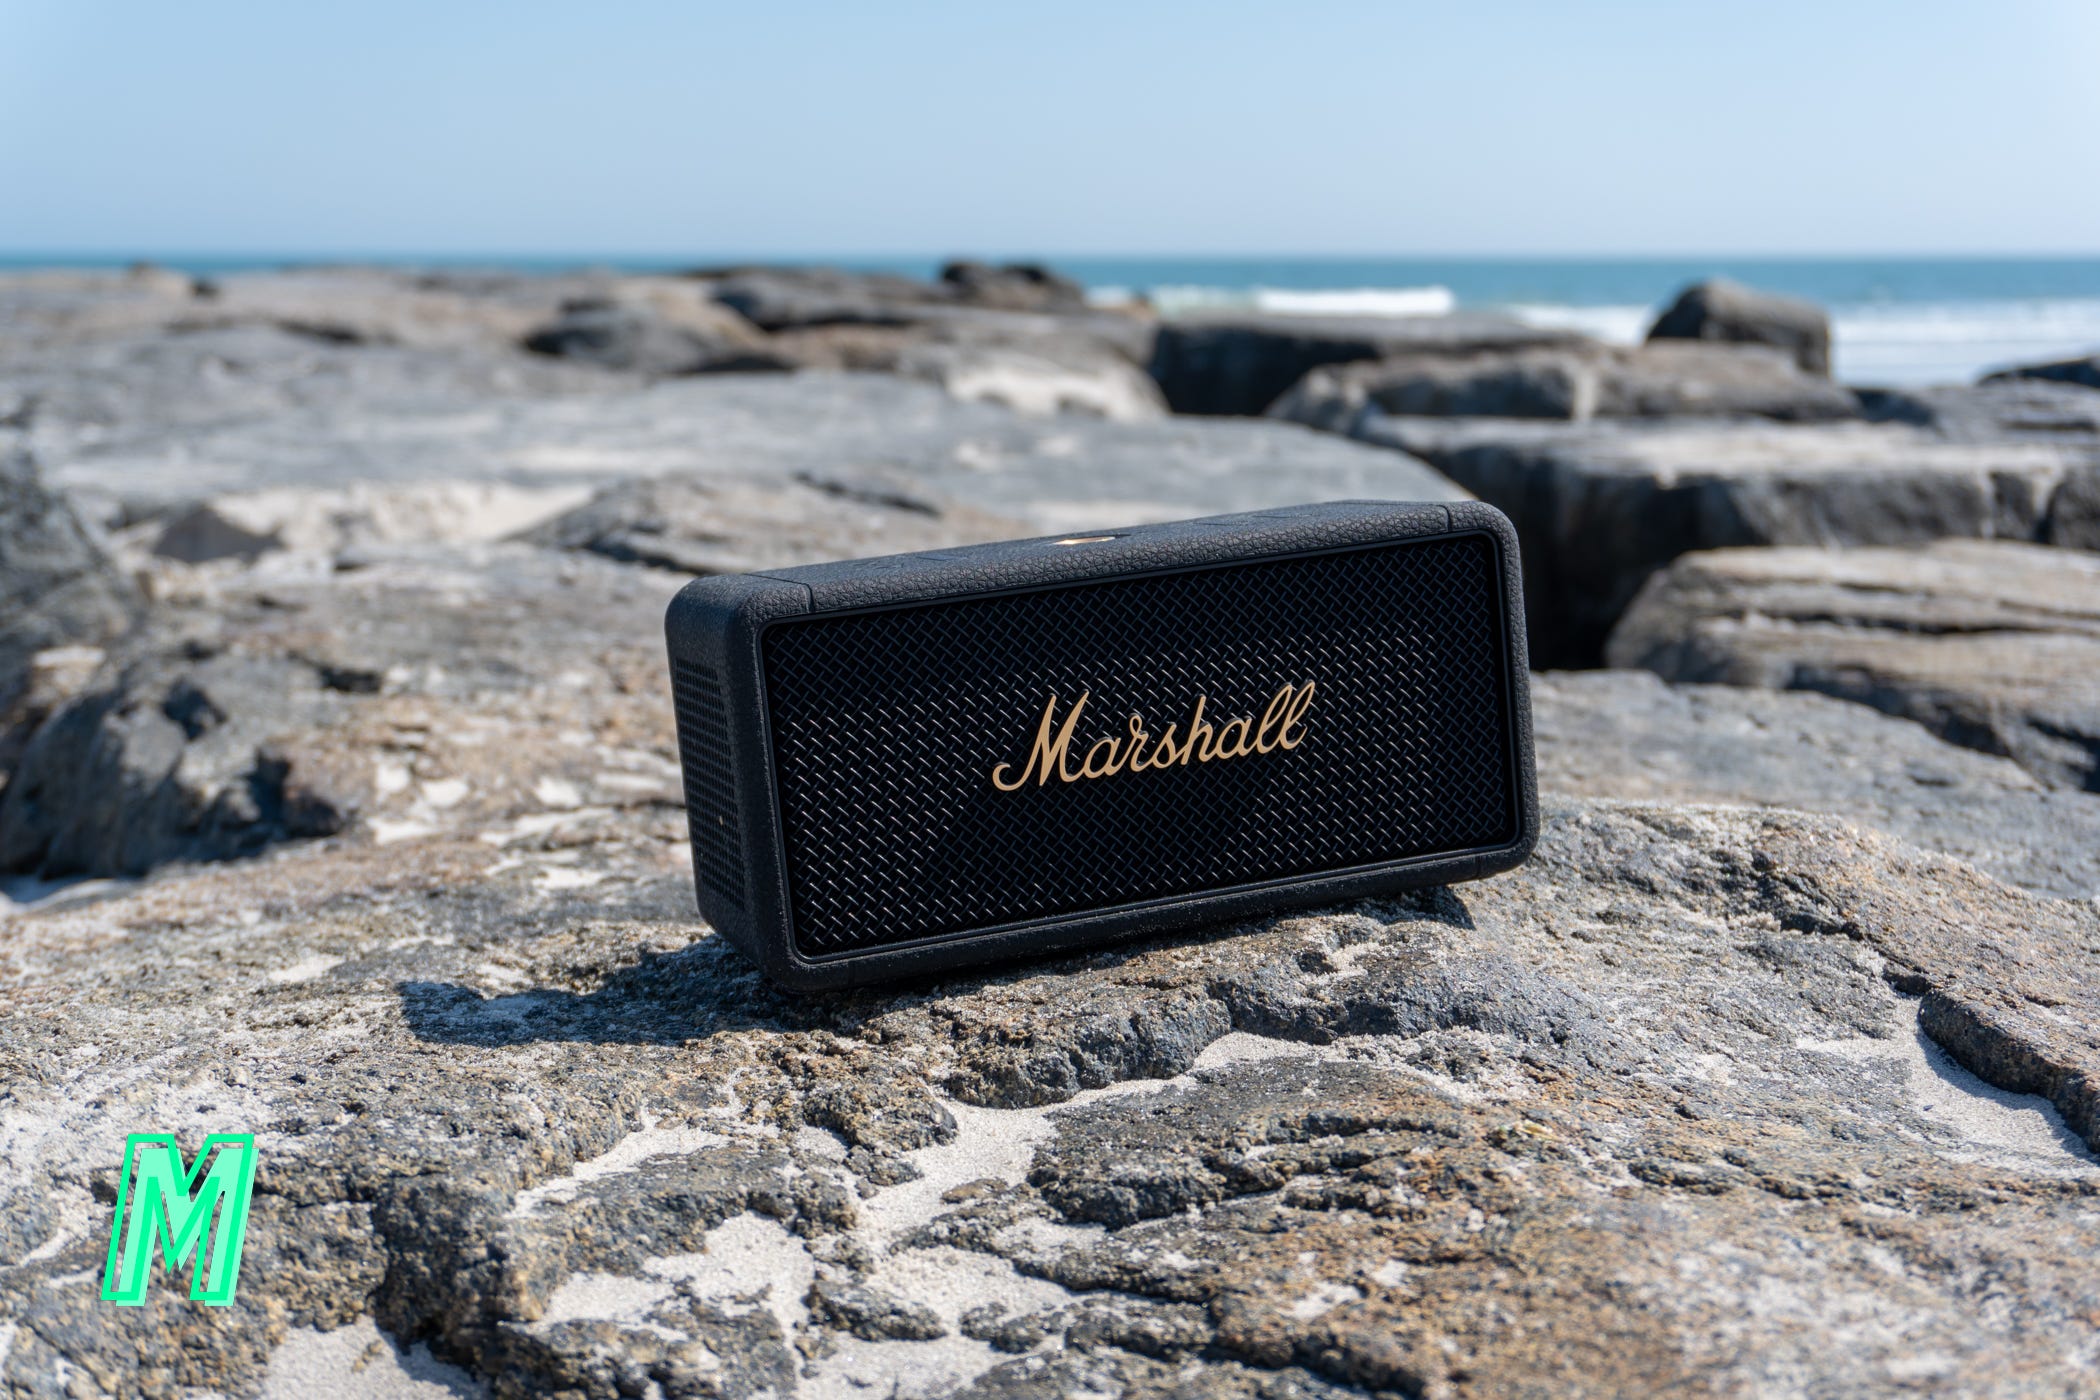 sound review: Marshall durable a in Middleton design Premium